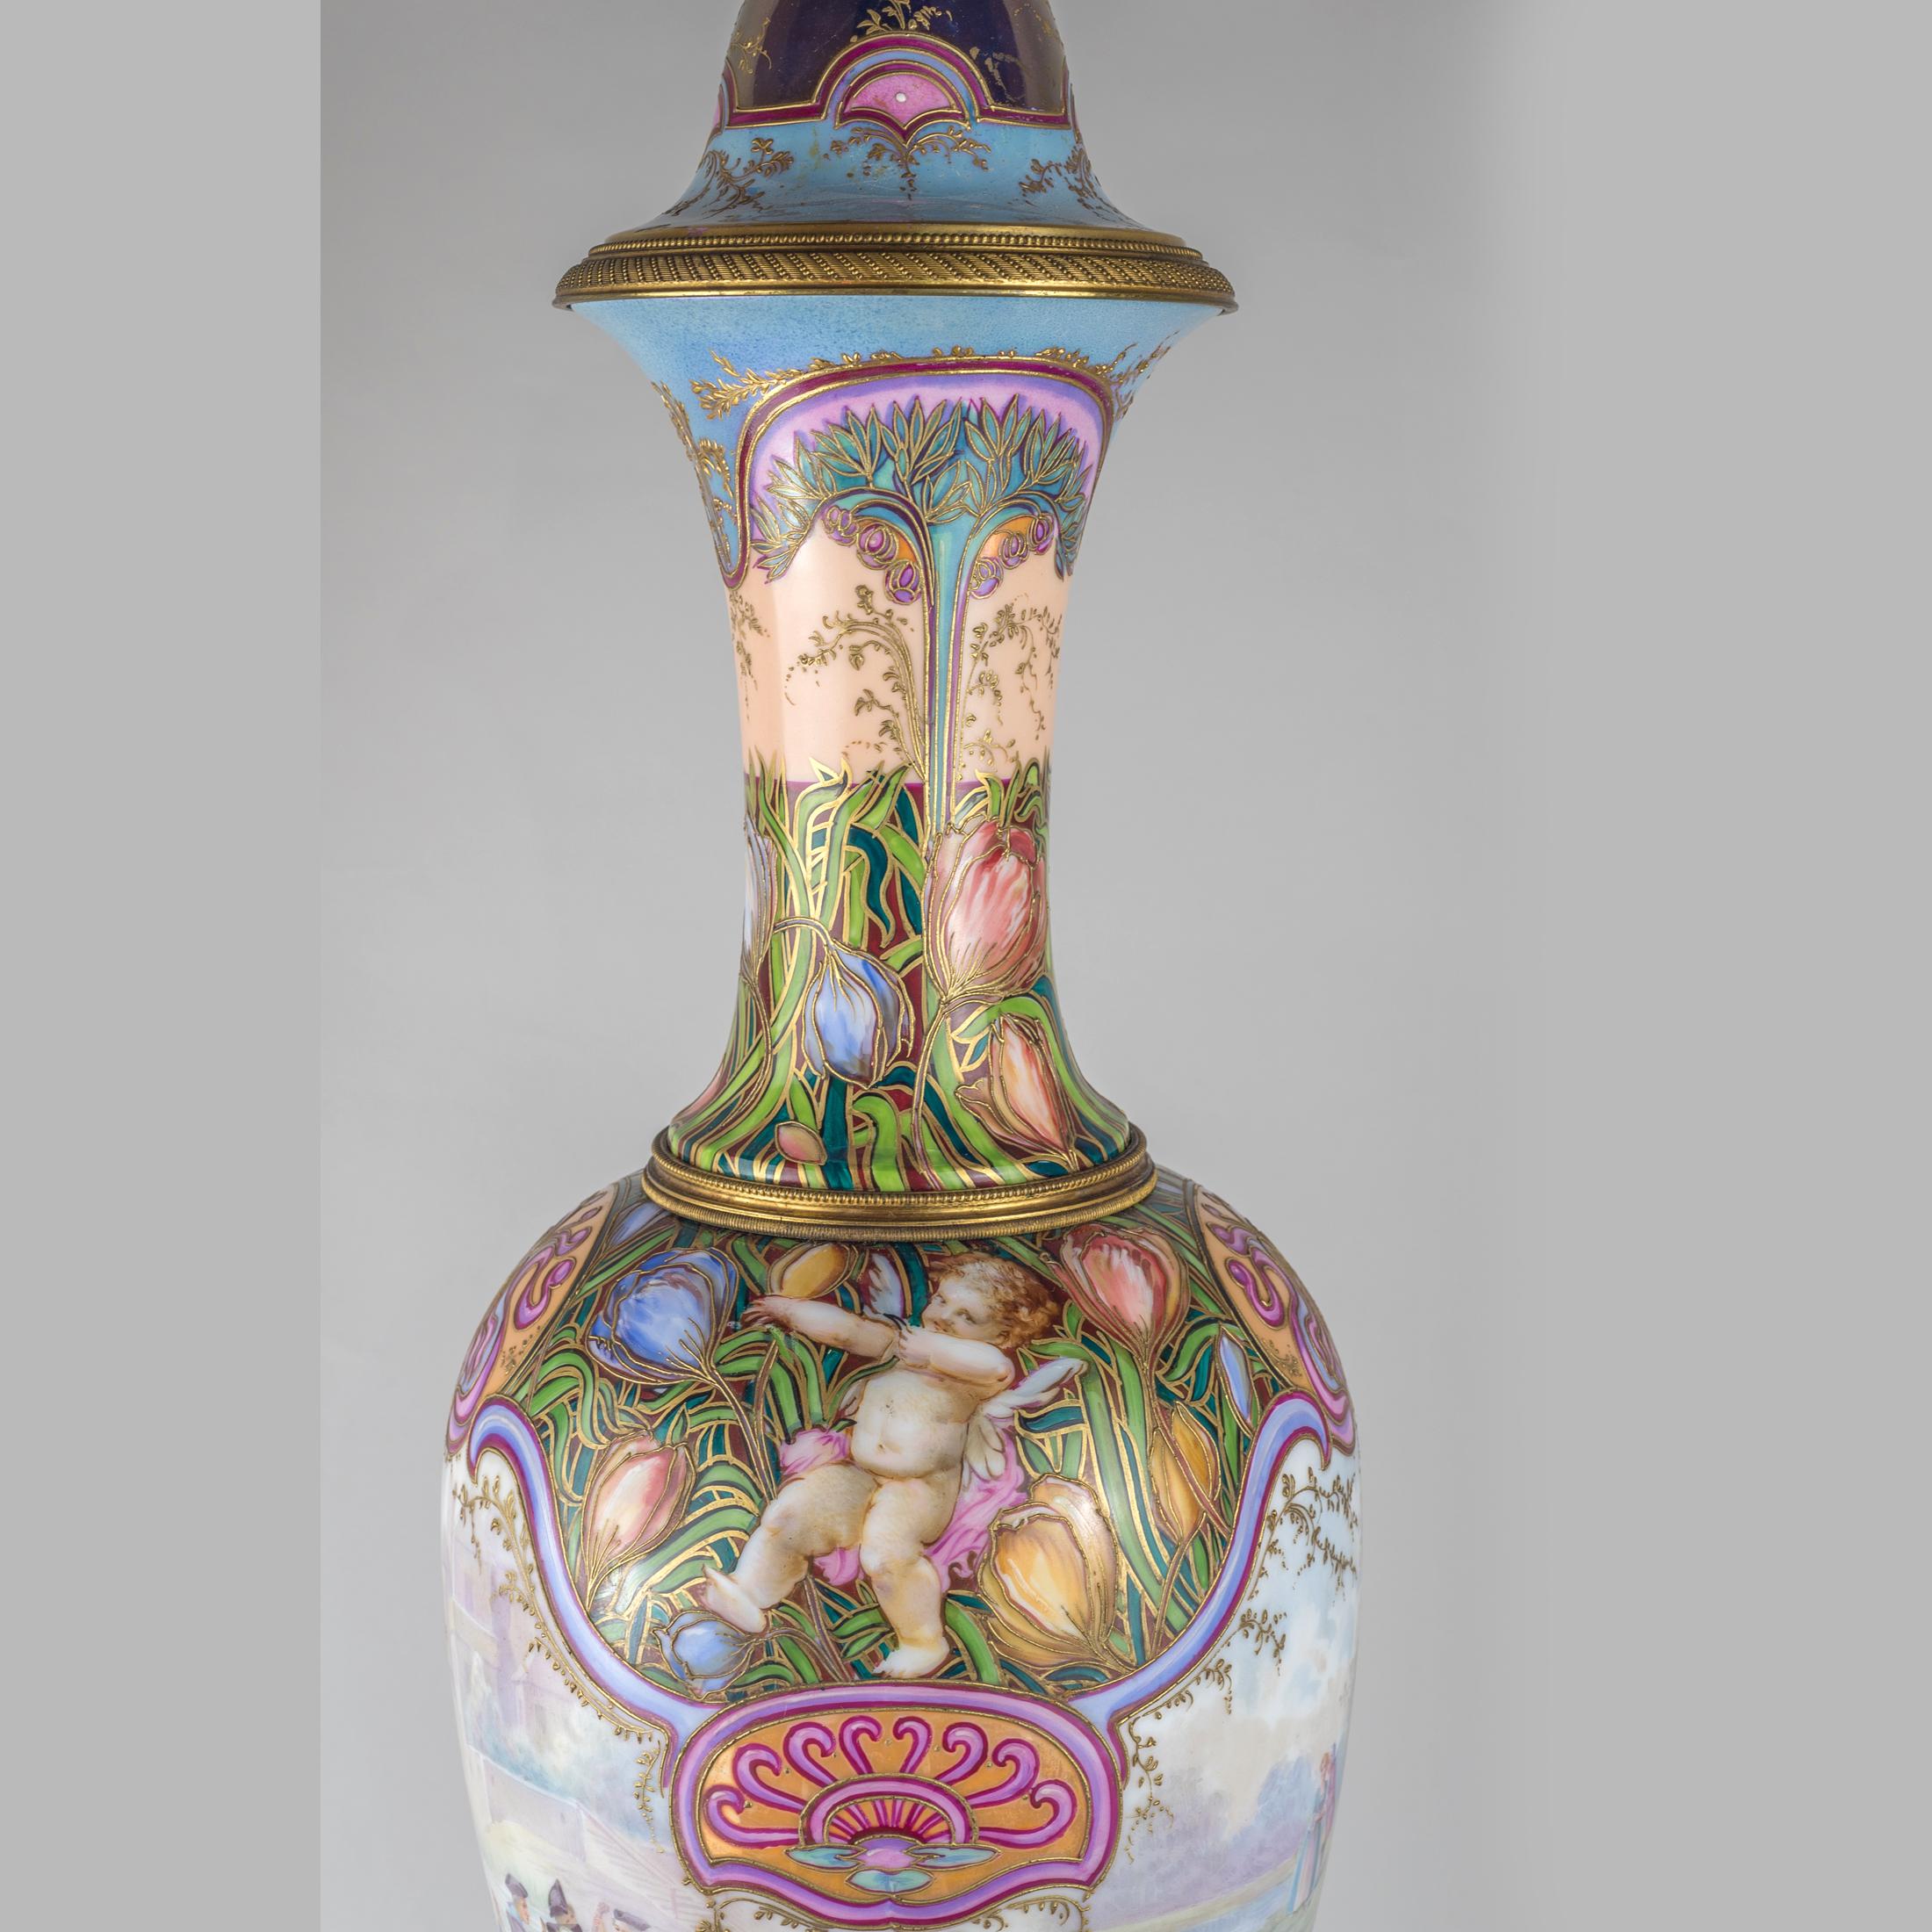 A fine quality Sèvres style gilt porcelain pink iridescent glaze portrait vase and cover. 

Date: 19th century
Origin: French
Dimension: 32 in. x 7 1/2 in.